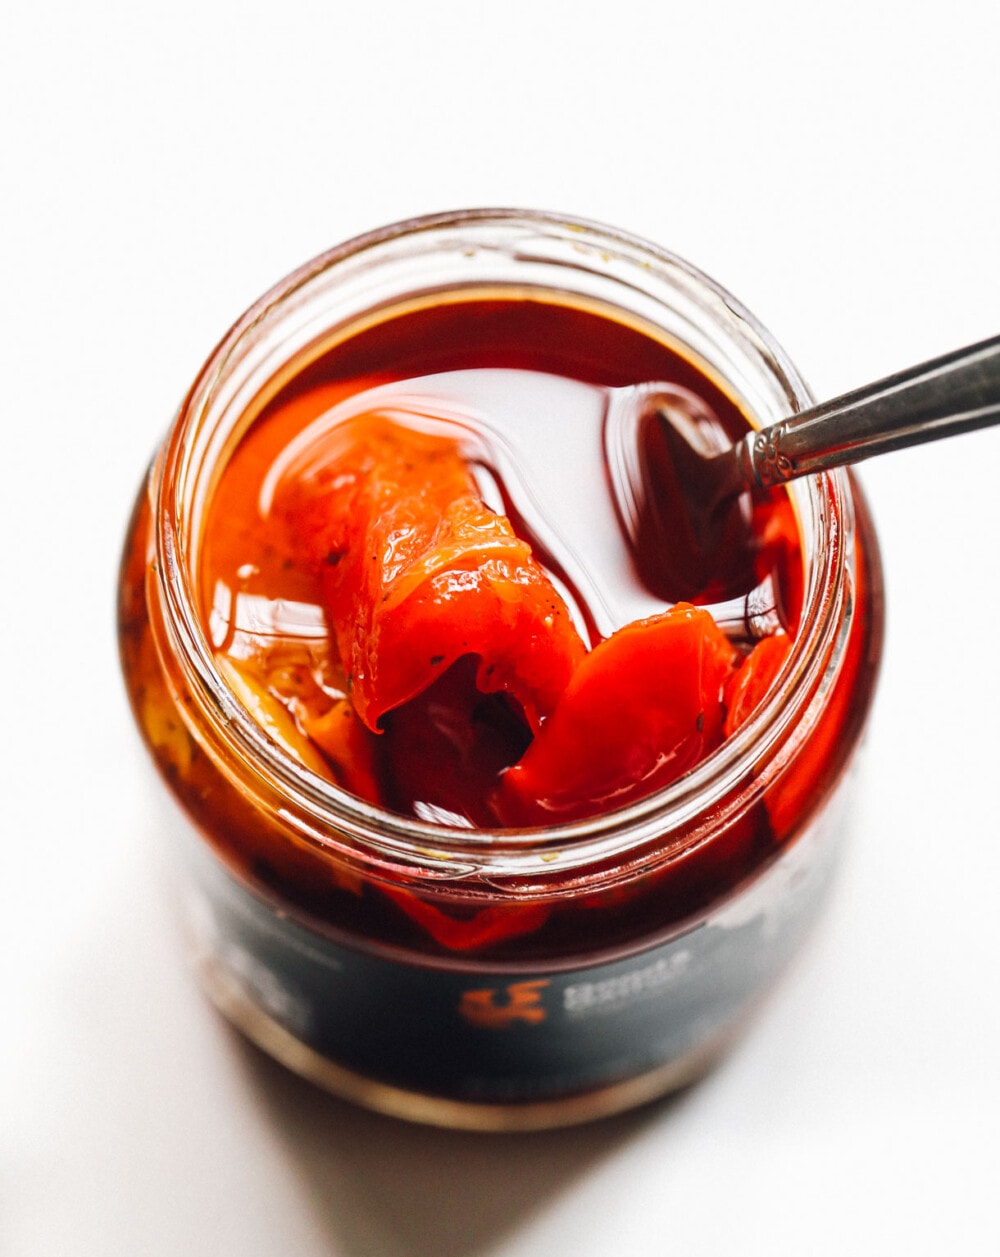 roasted red peppers in a jar